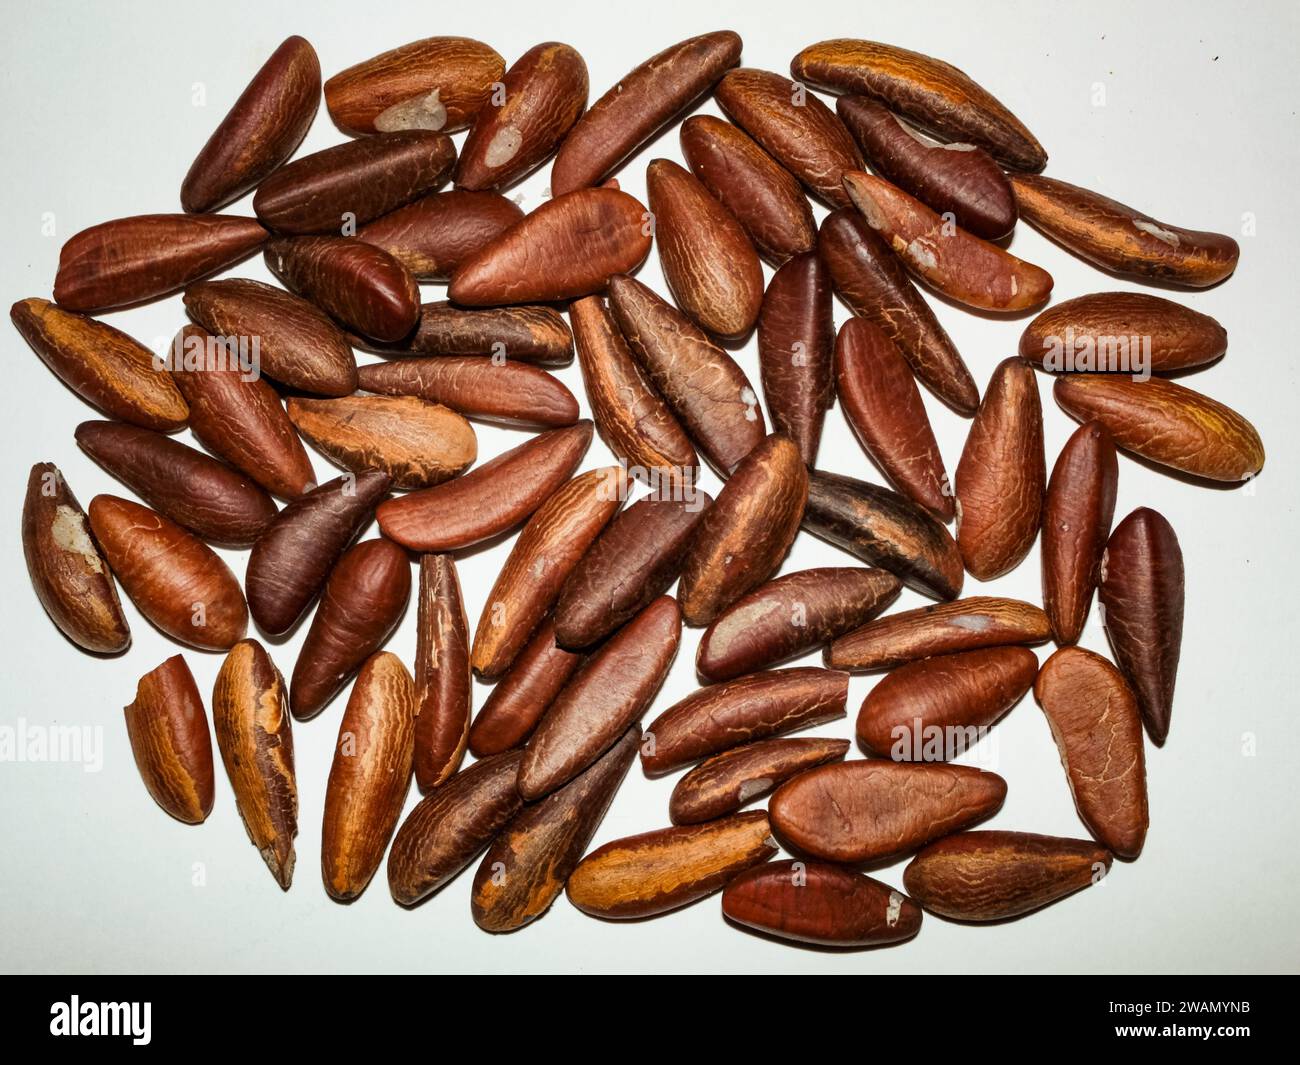 A portion of shelled almonds, from the babassu palm, Attalea speciosa, on a white surface Stock Photo